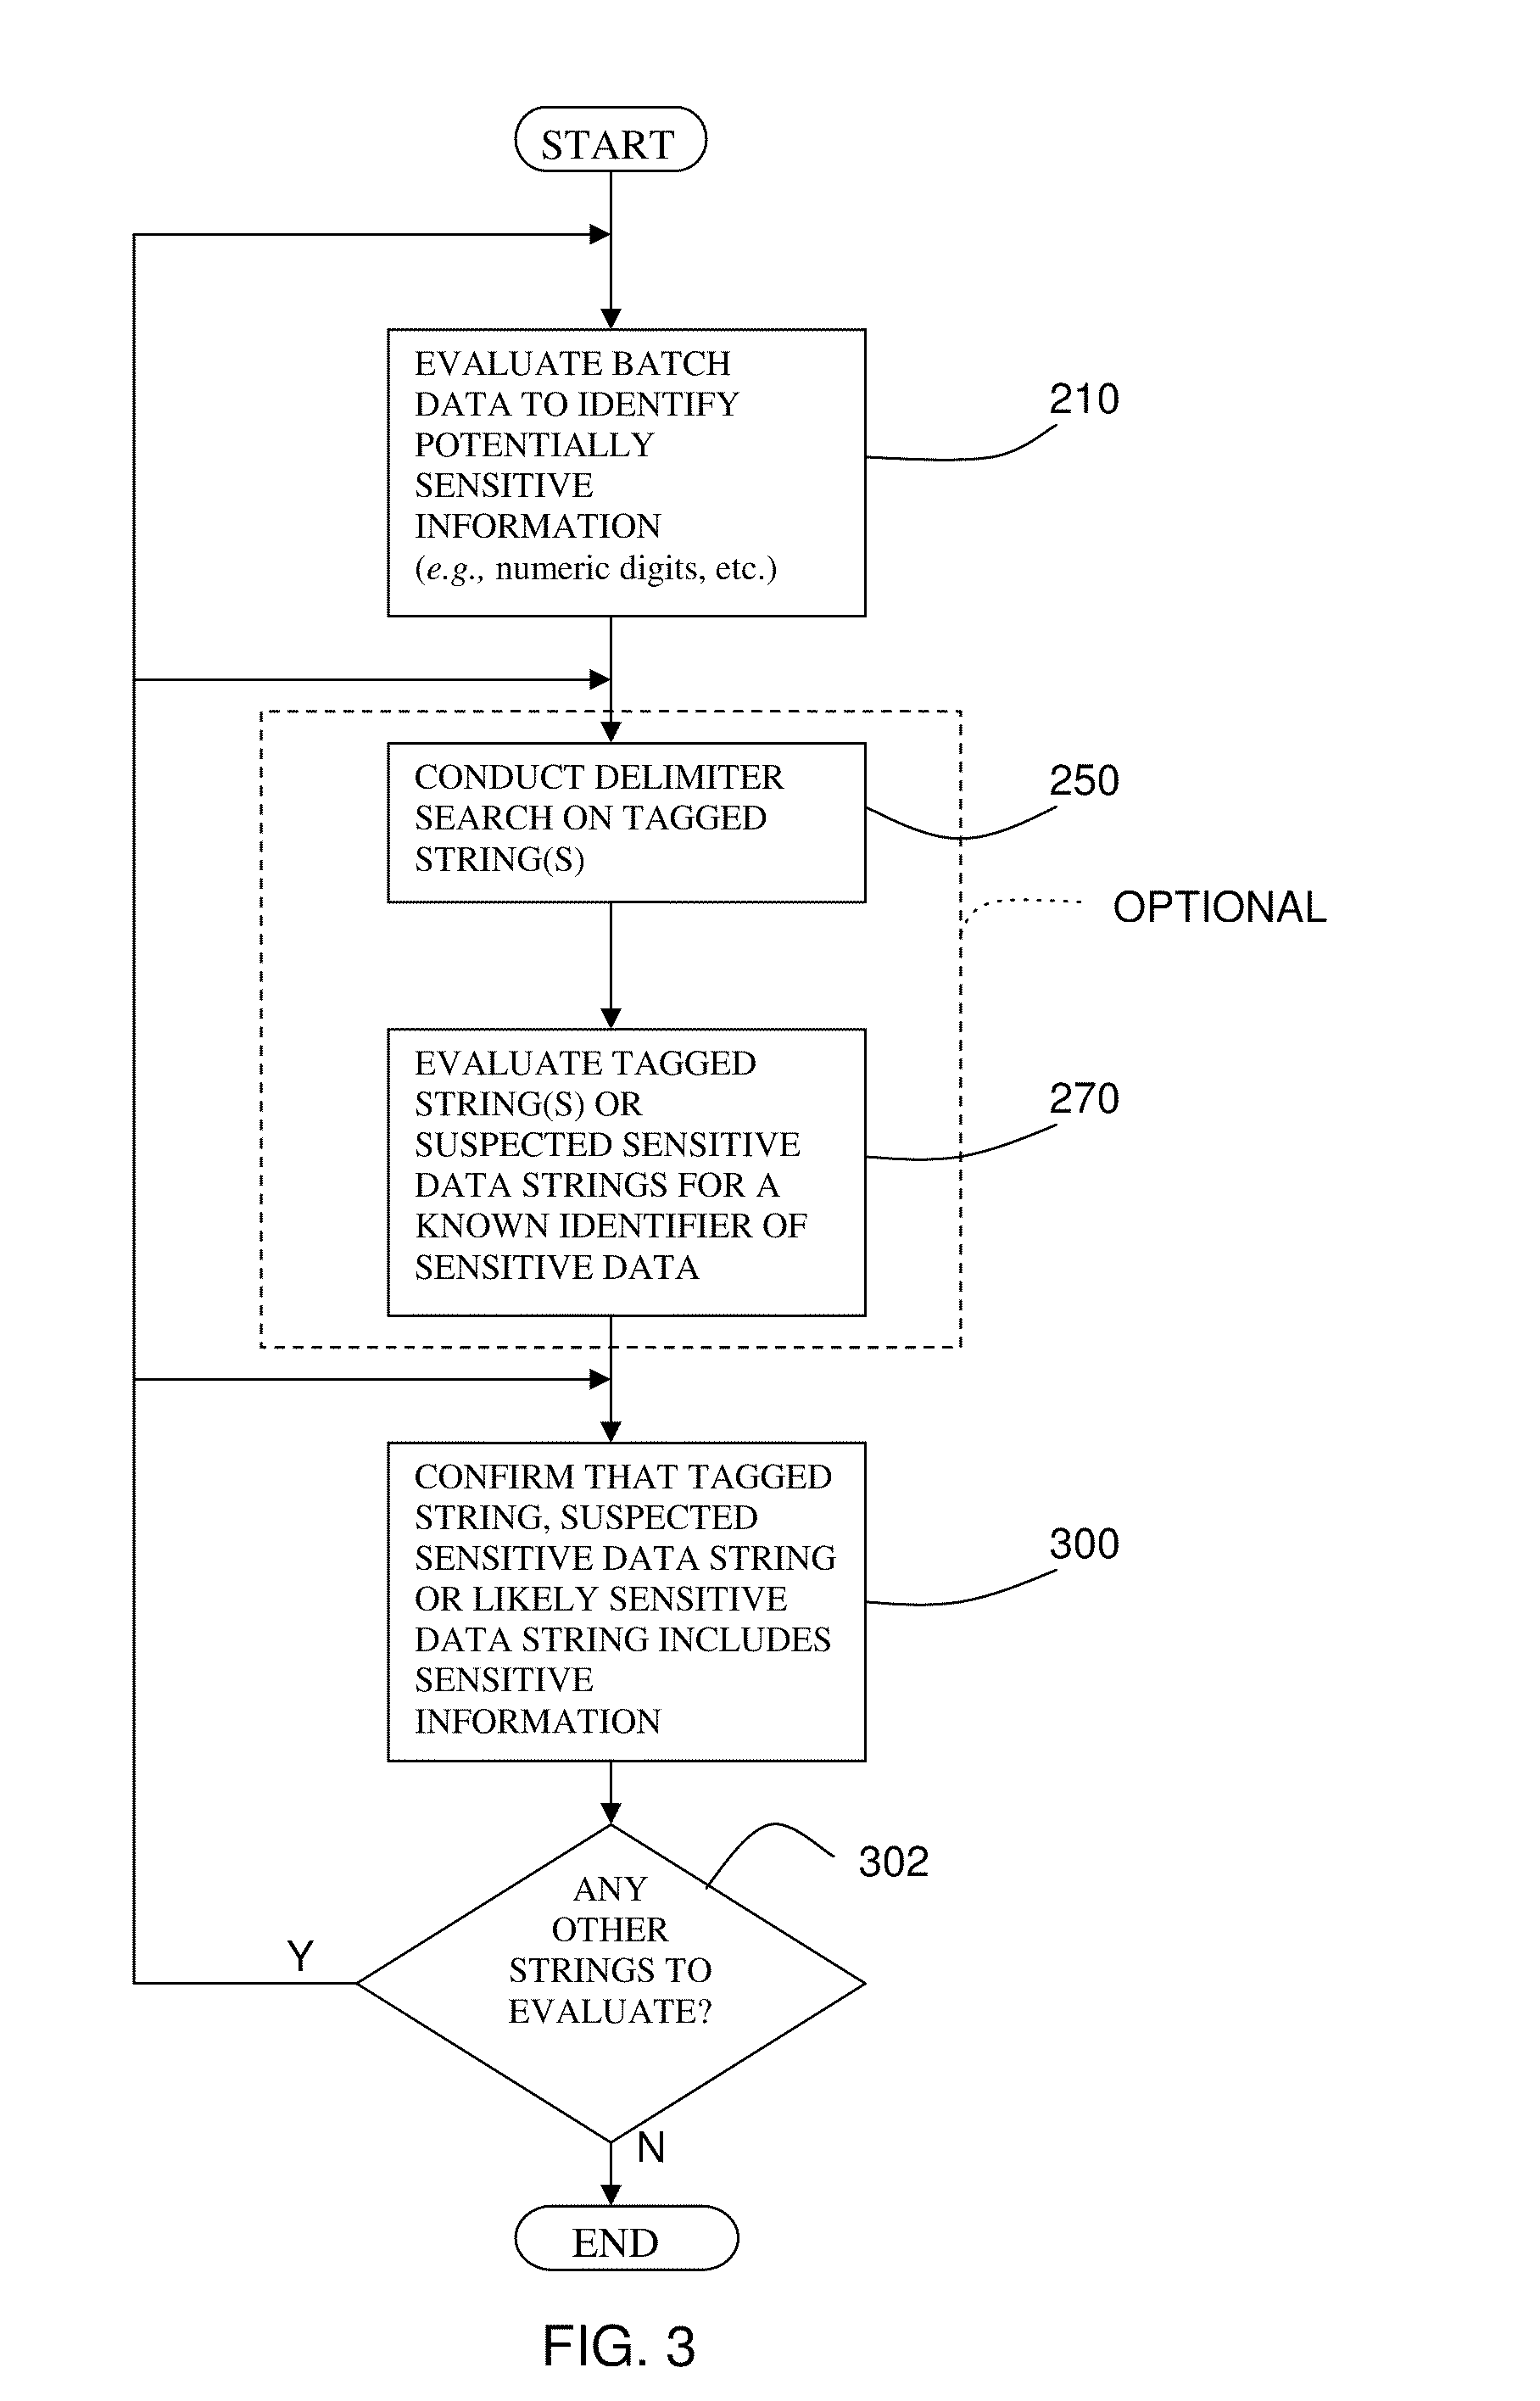 Systems and methods employing intermittent scanning techniques to identify sensitive information in data